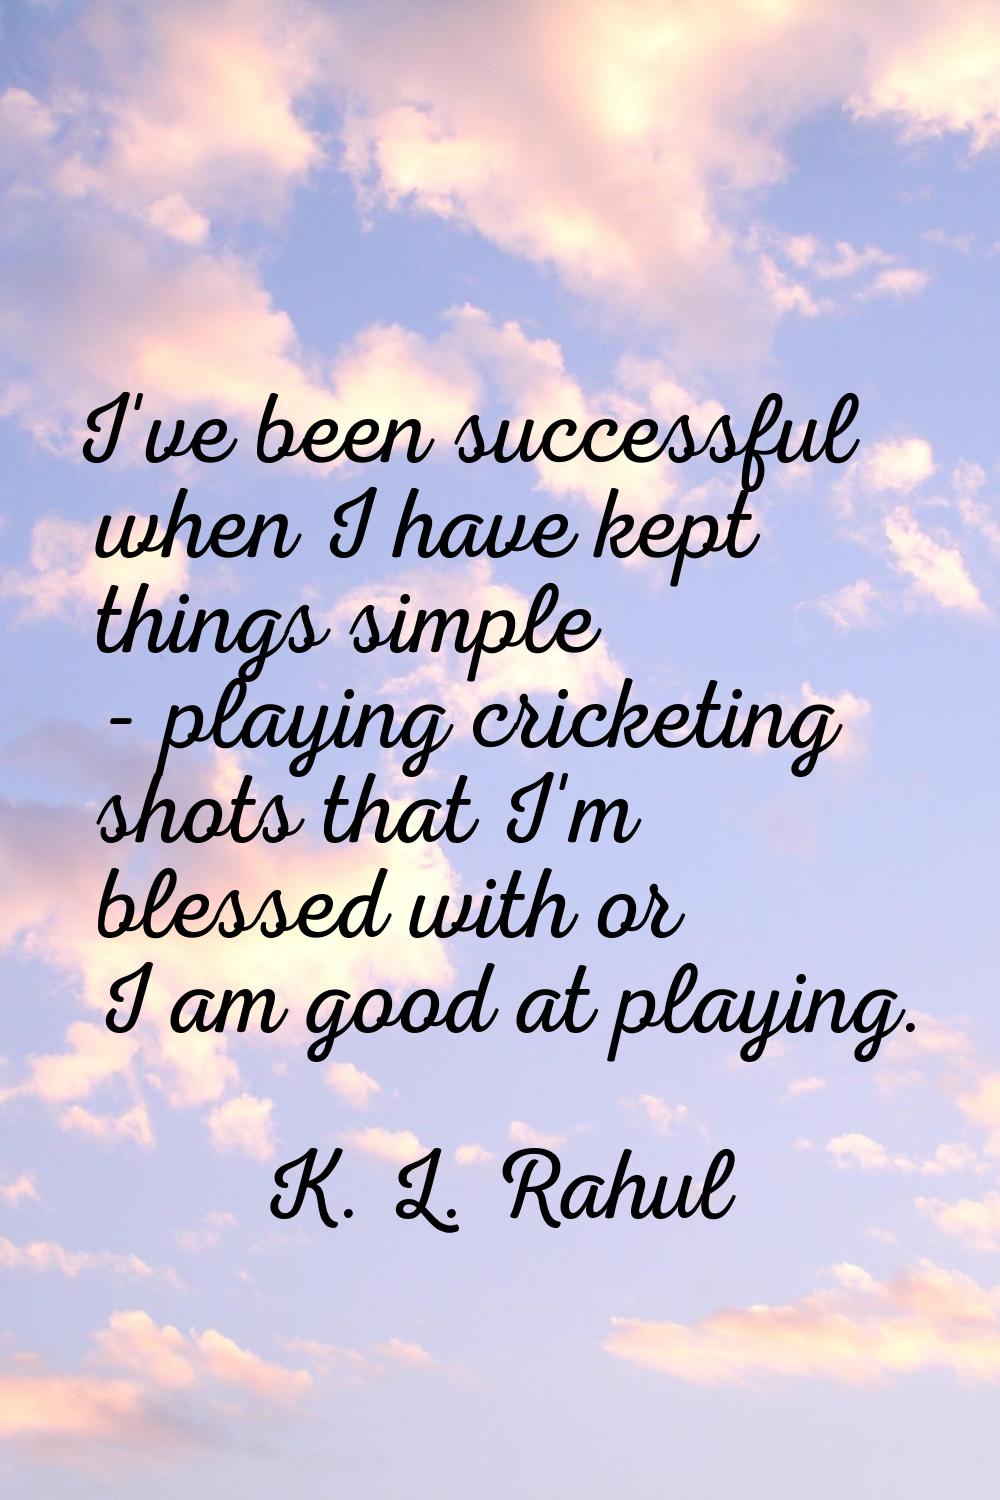 I've been successful when I have kept things simple - playing cricketing shots that I'm blessed wit